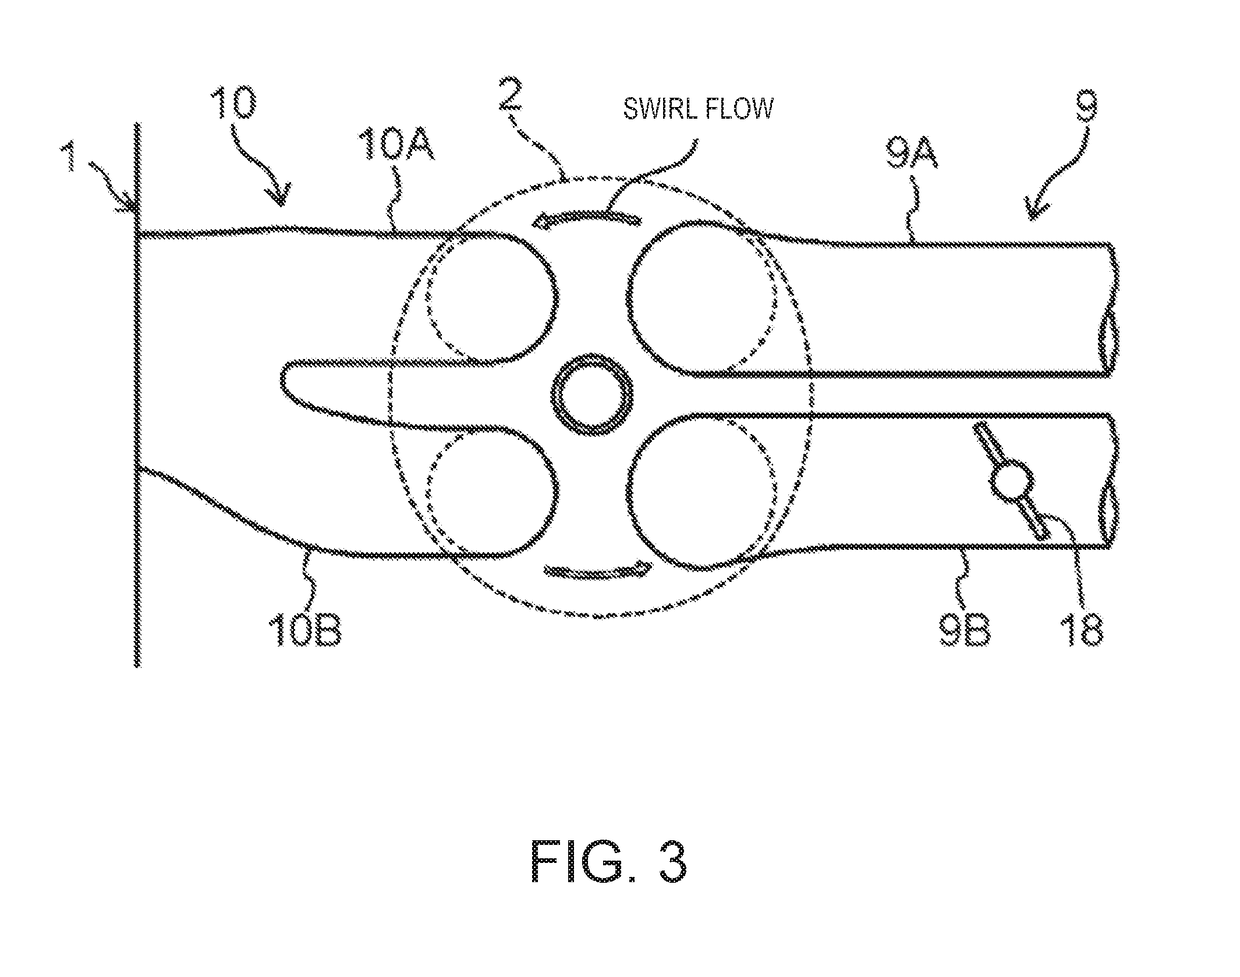 Control device for engine